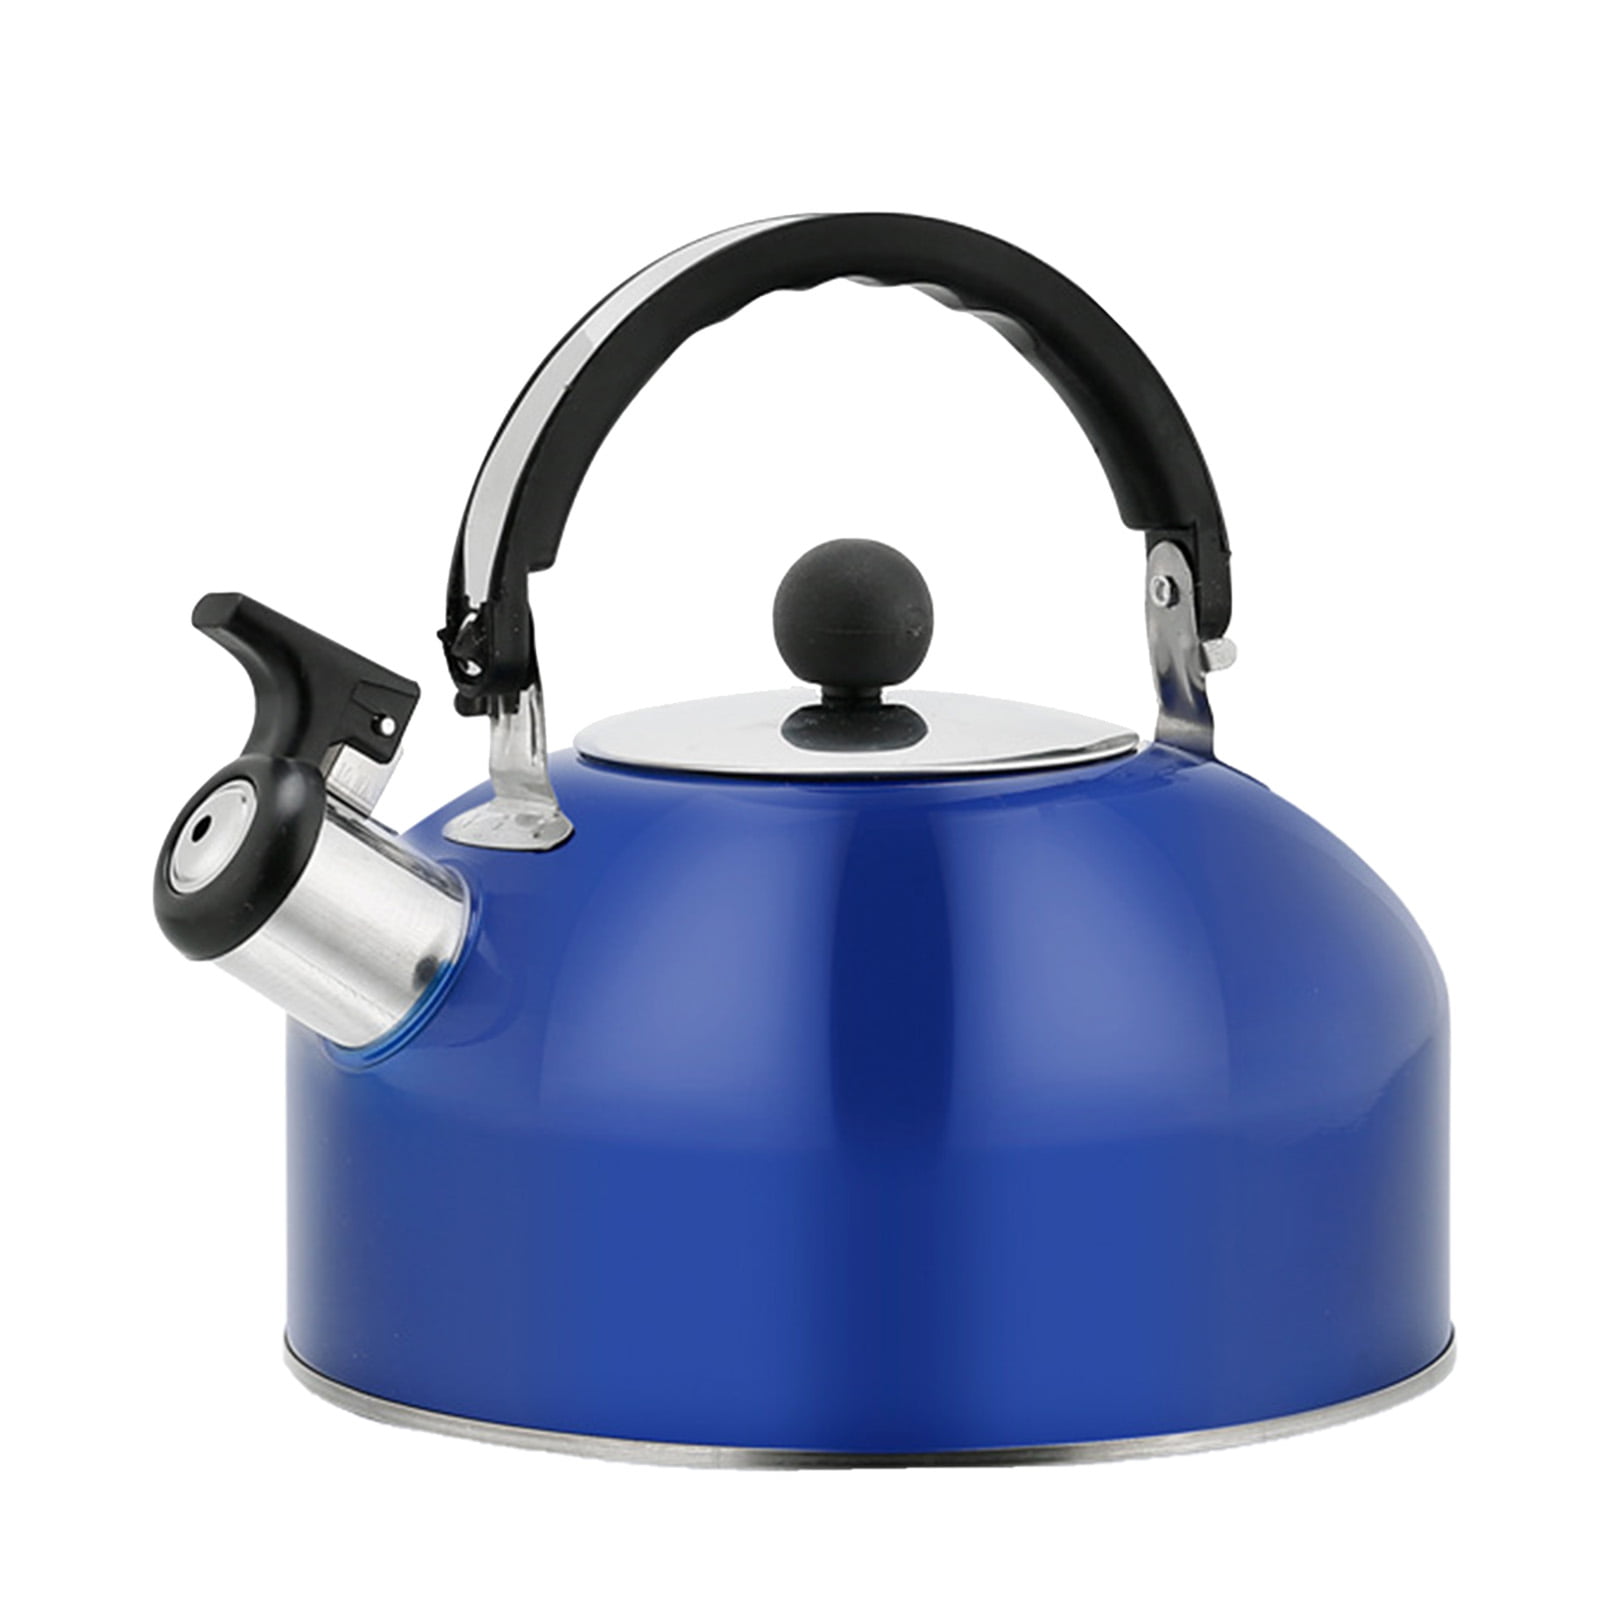 NEW 2.5L GREEN STAINLESS STEEL WHISTLING KETTLE CAMPING FISHING LIGHTWEIGHT HOME 